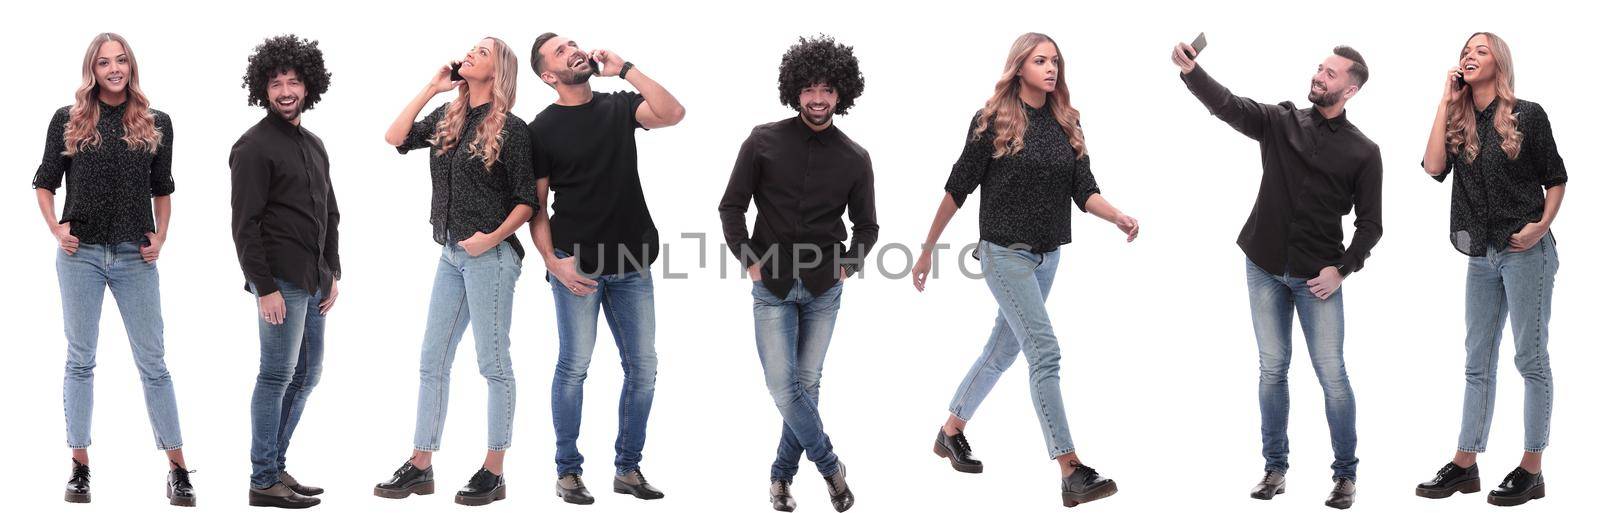 collage of photos of successful young people. isolated on a white background